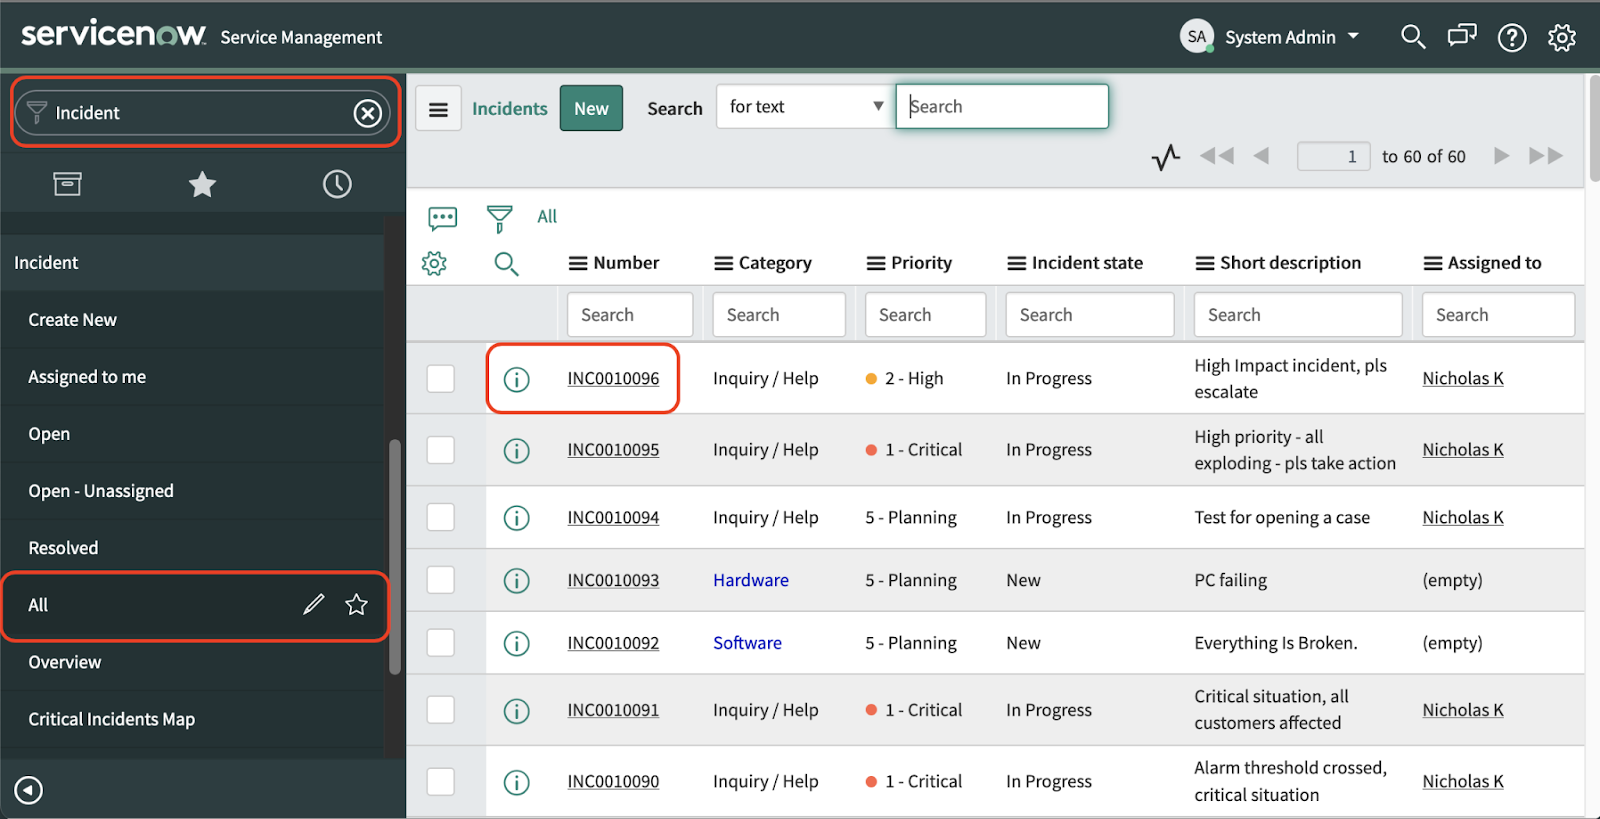 A screenshot of the Incidents section of the ServiceNow dashboard